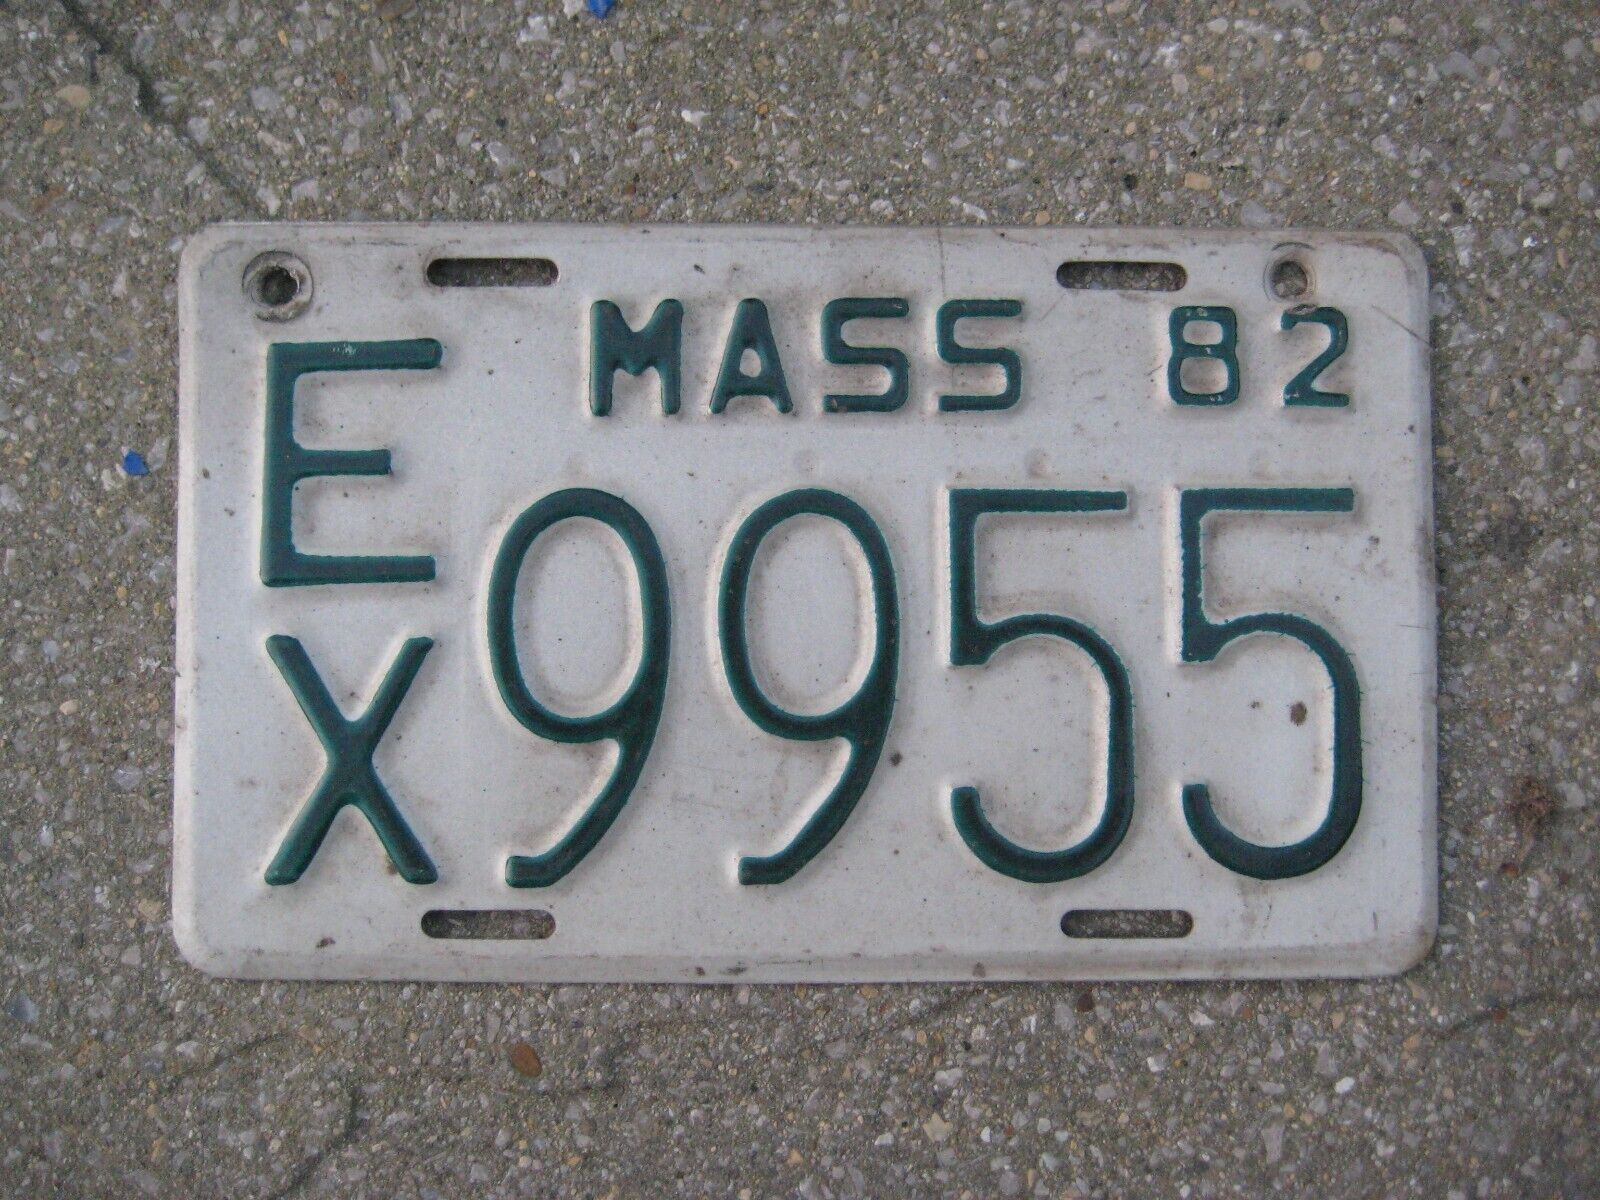 AMERICAN MASSACHUSETTS VINTAGE MOTORCYCLE 1982 # EX 9955 RARE NUMBER PLATE